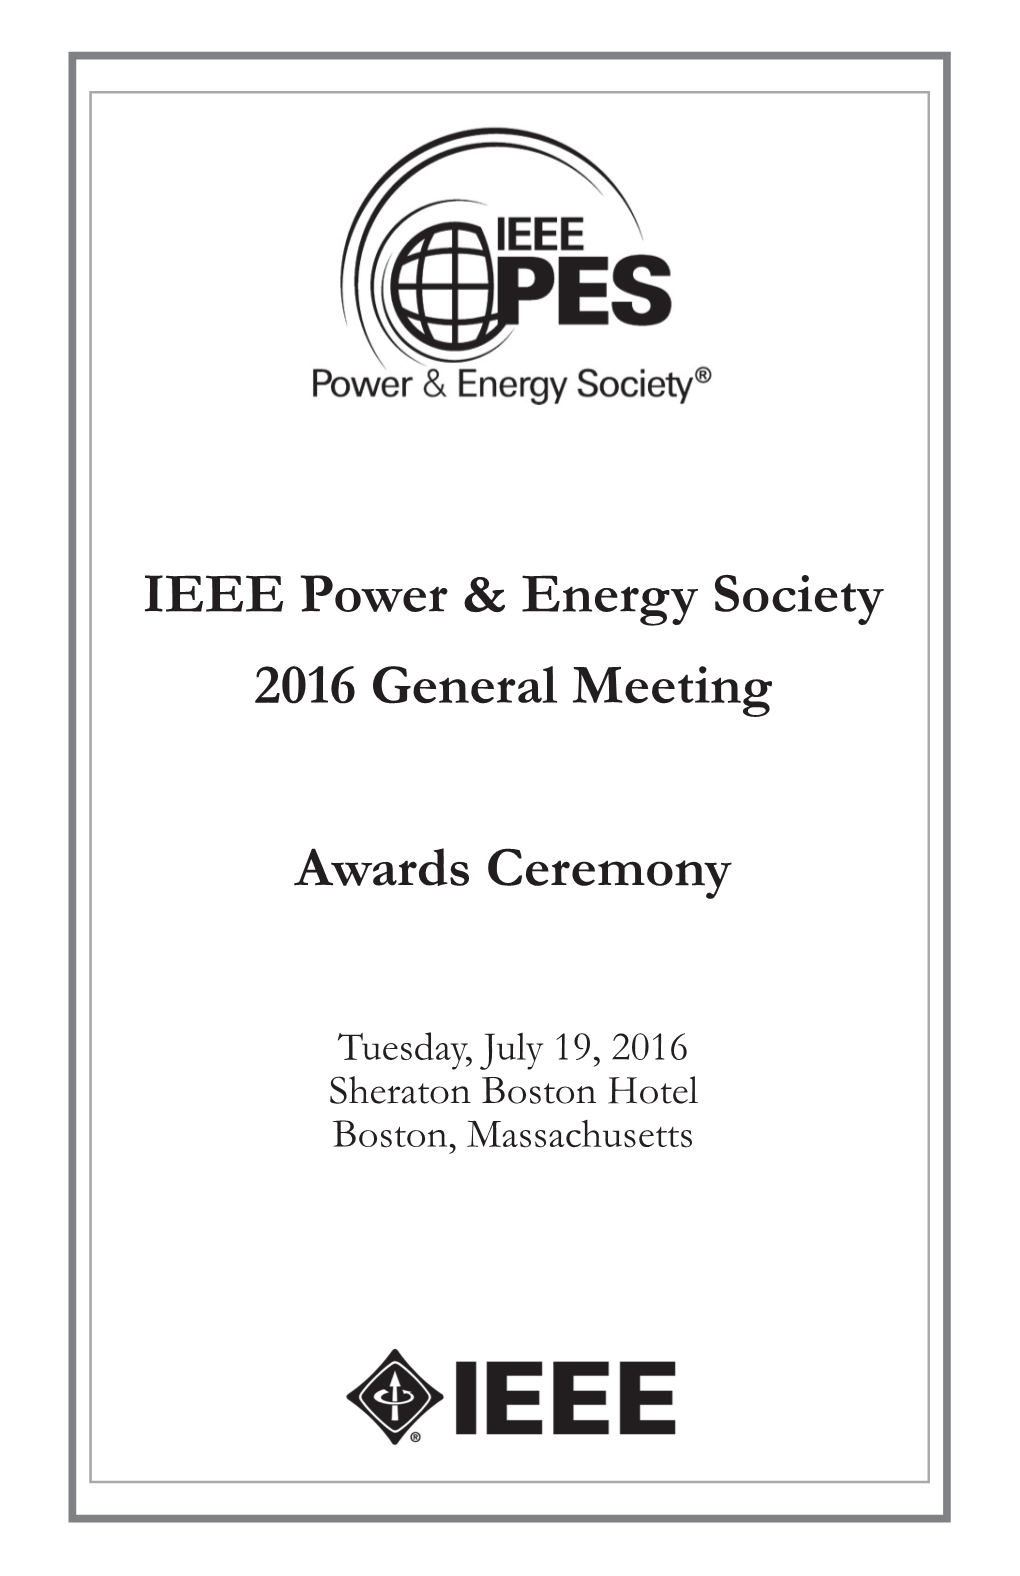 IEEE Power & Energy Society 2016 General Meeting Awards Ceremony